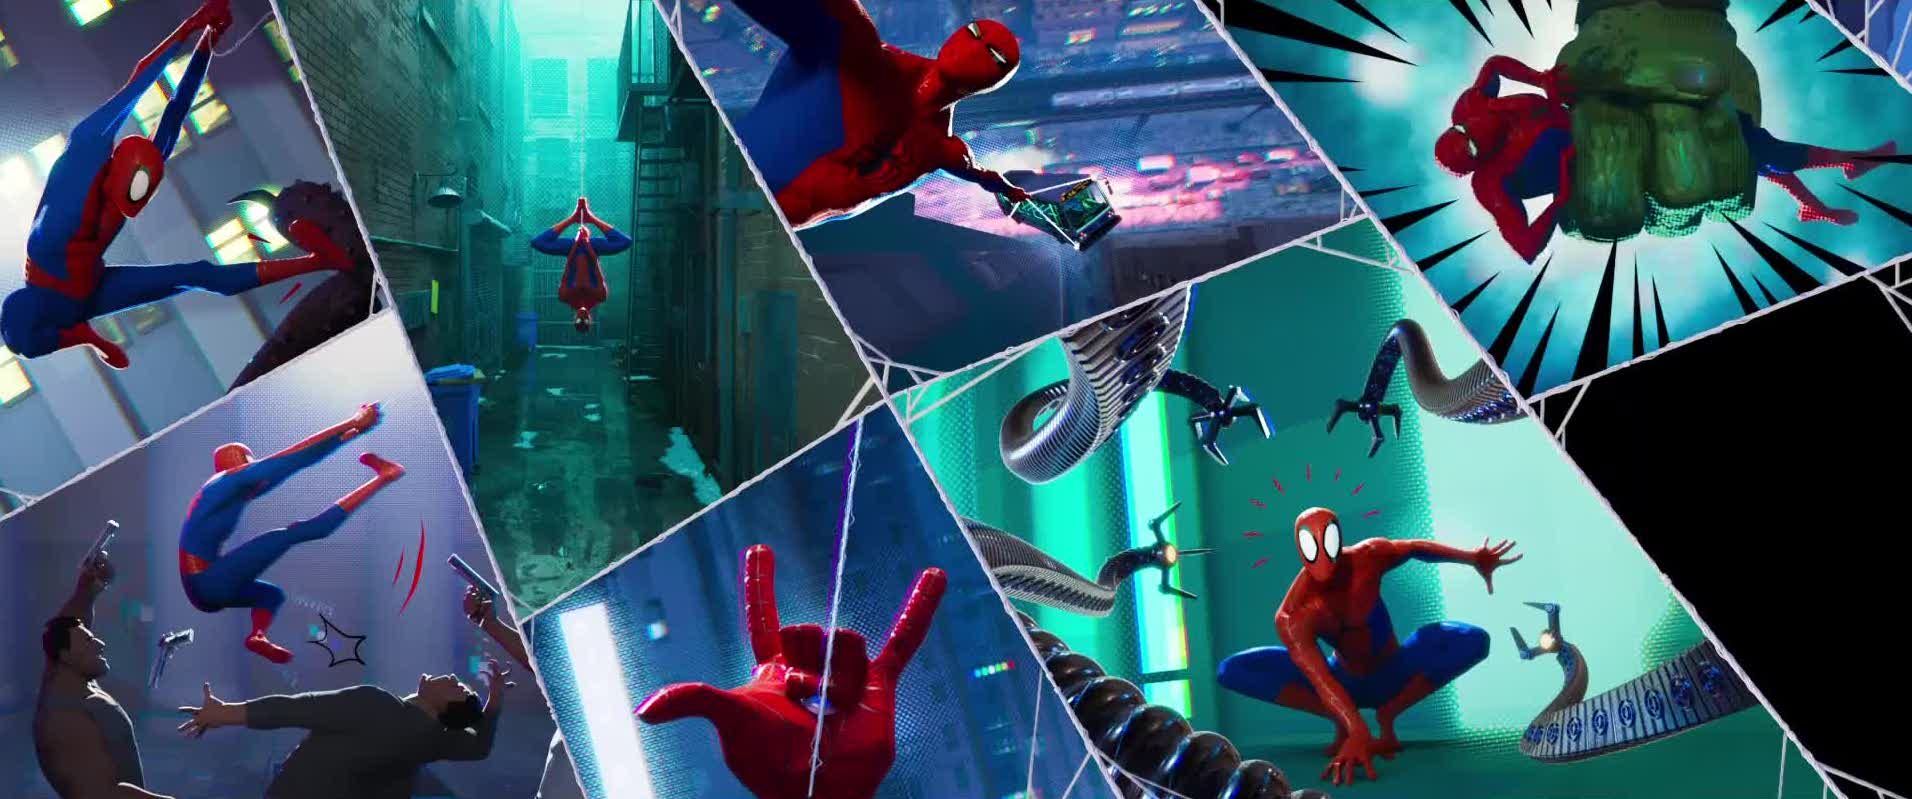 Spider Man Into The Spider Verse Required Inventing A New